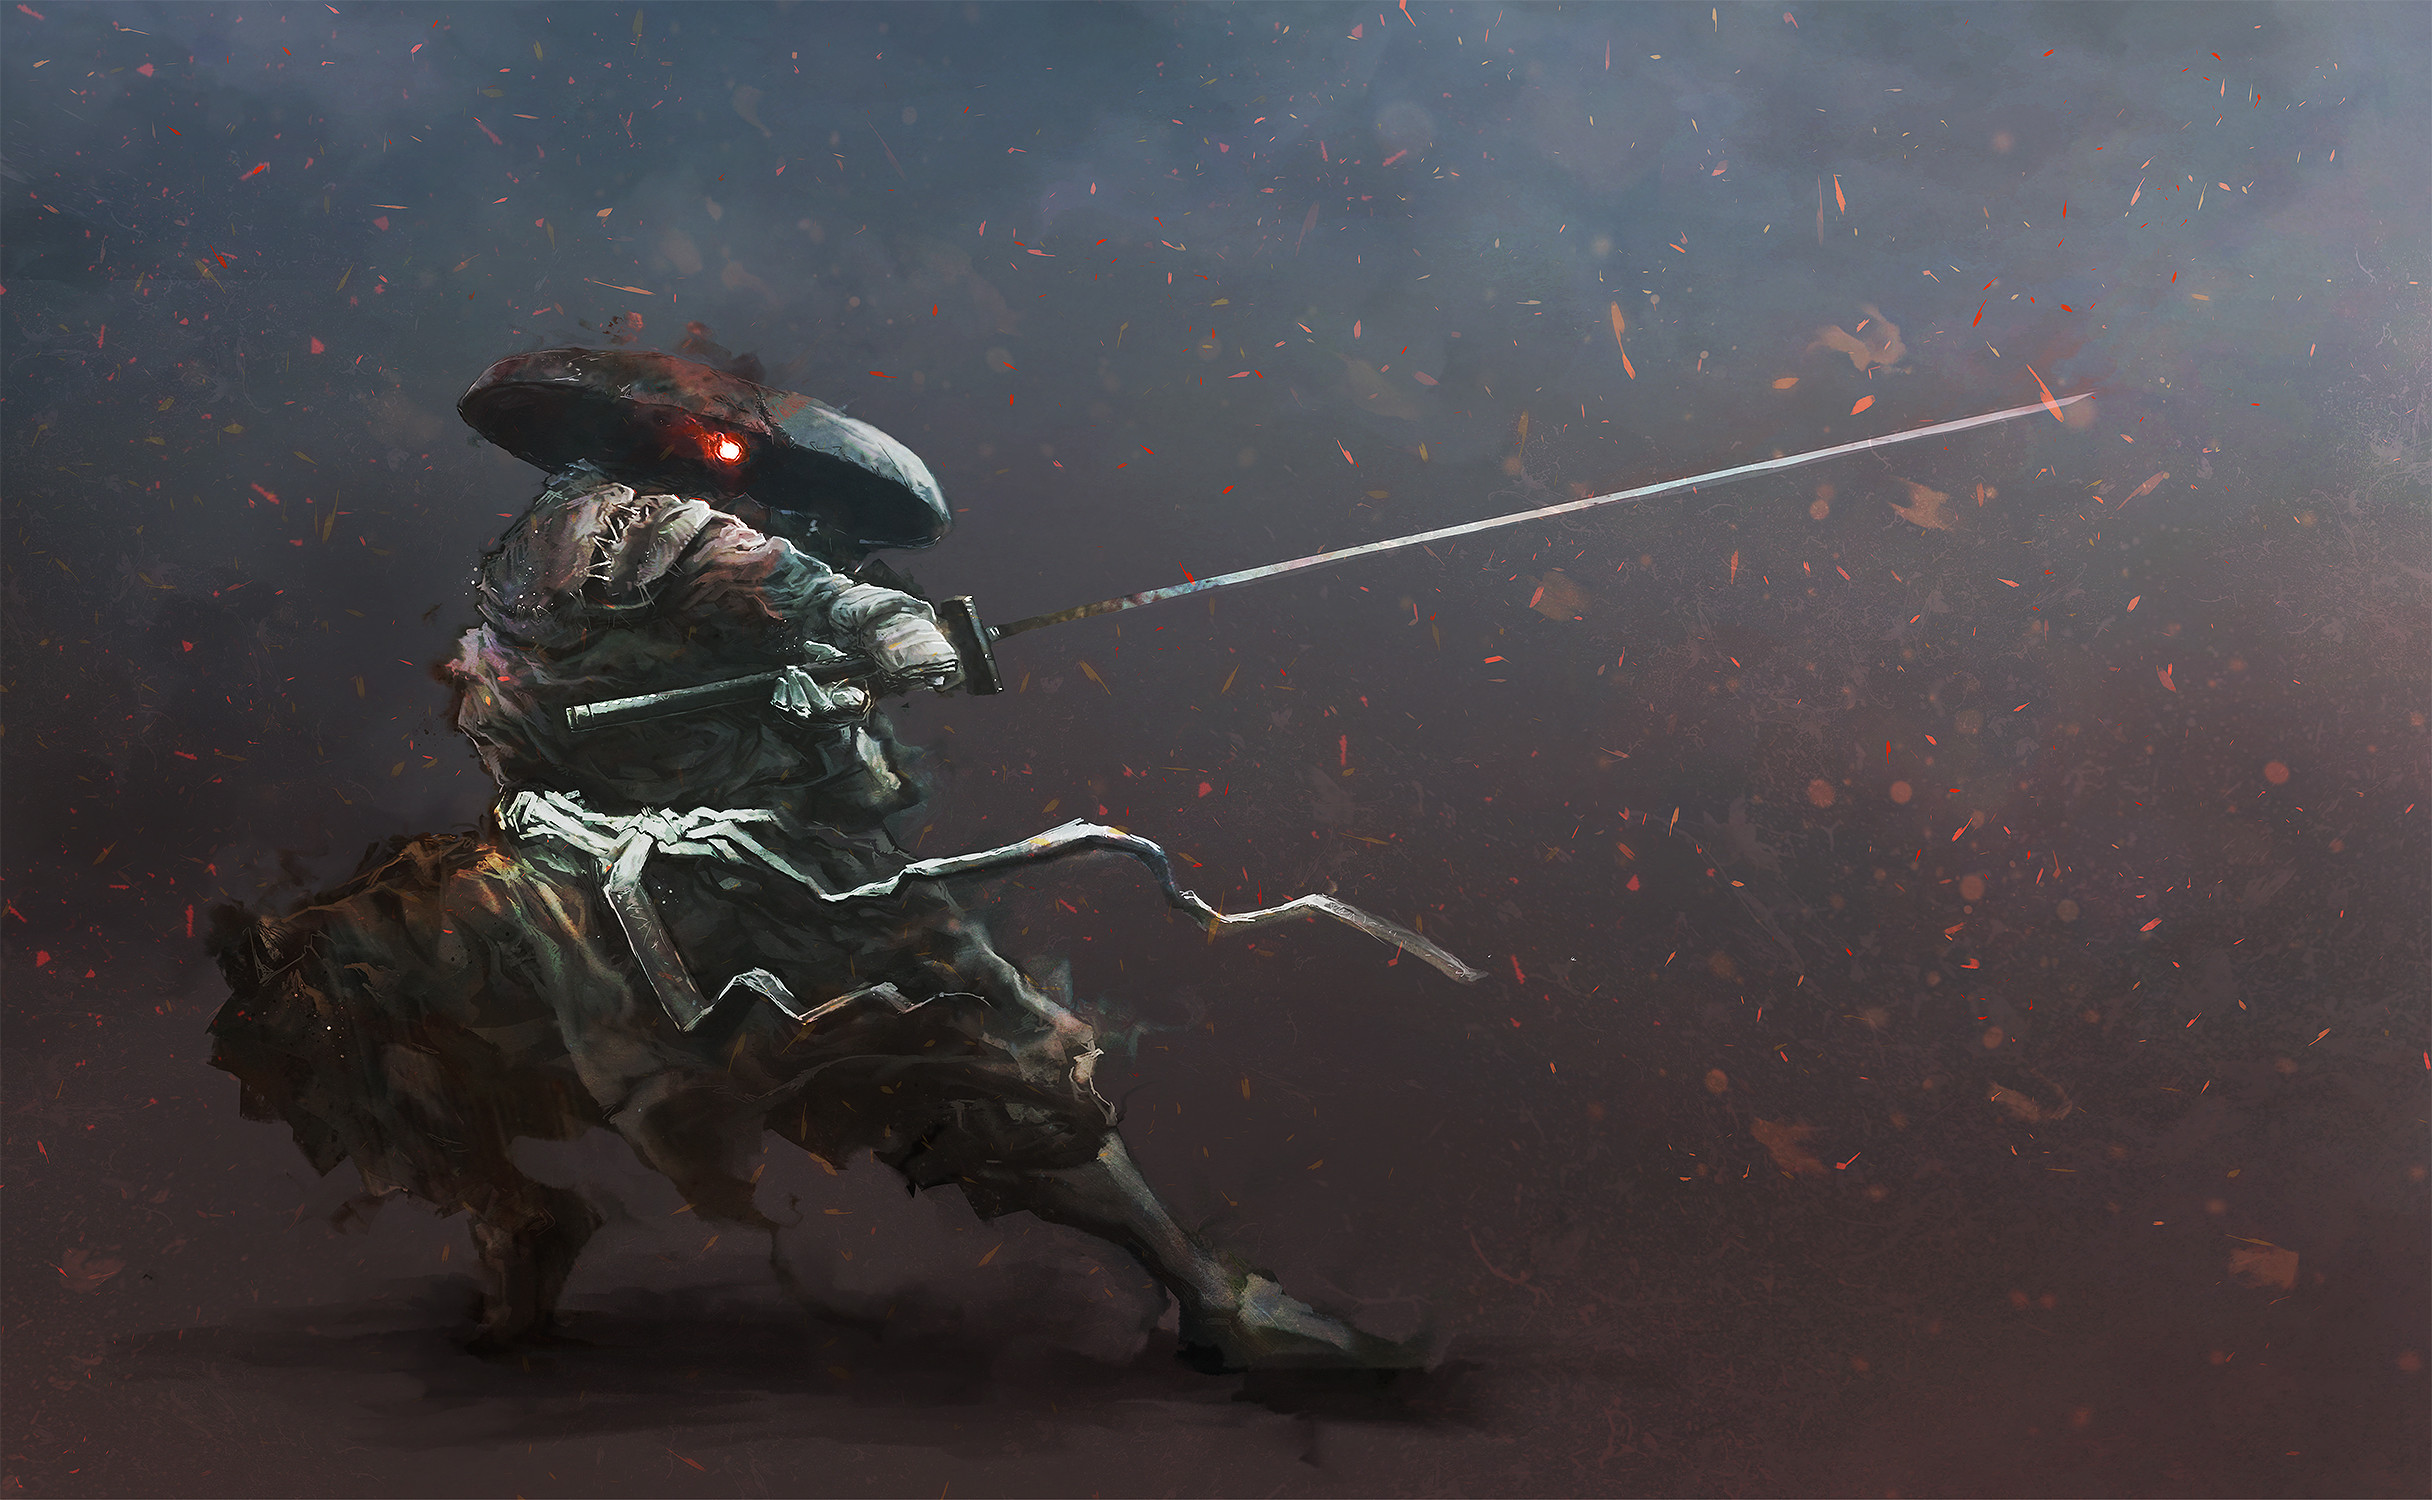 Samurai Wallpaper 4K Pc : Download animated wallpaper, share & use by